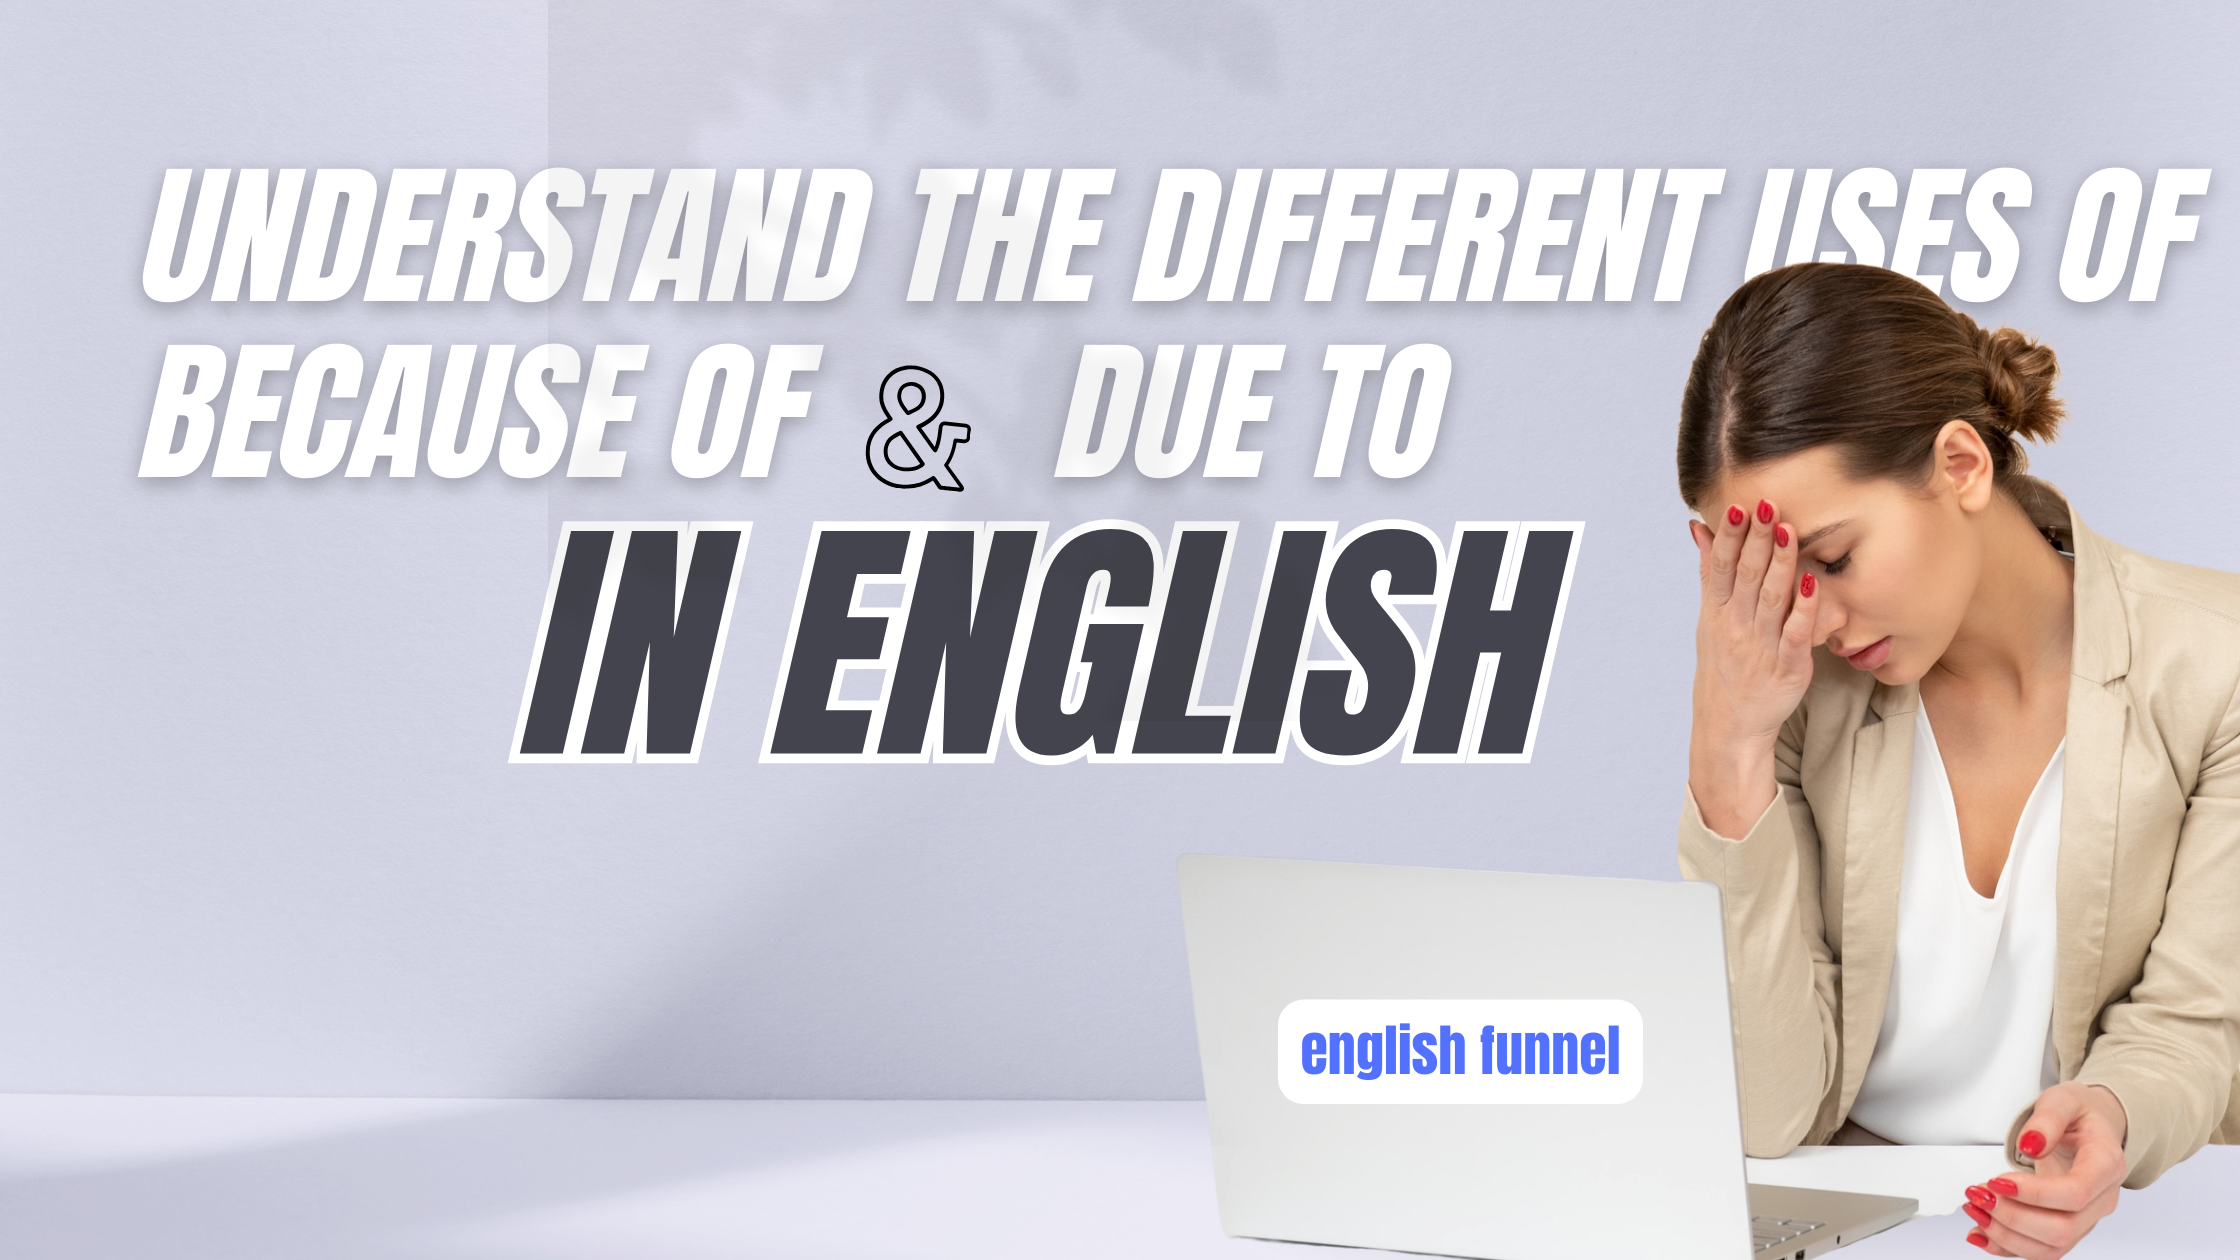 Understand the different uses of because of and due to in English